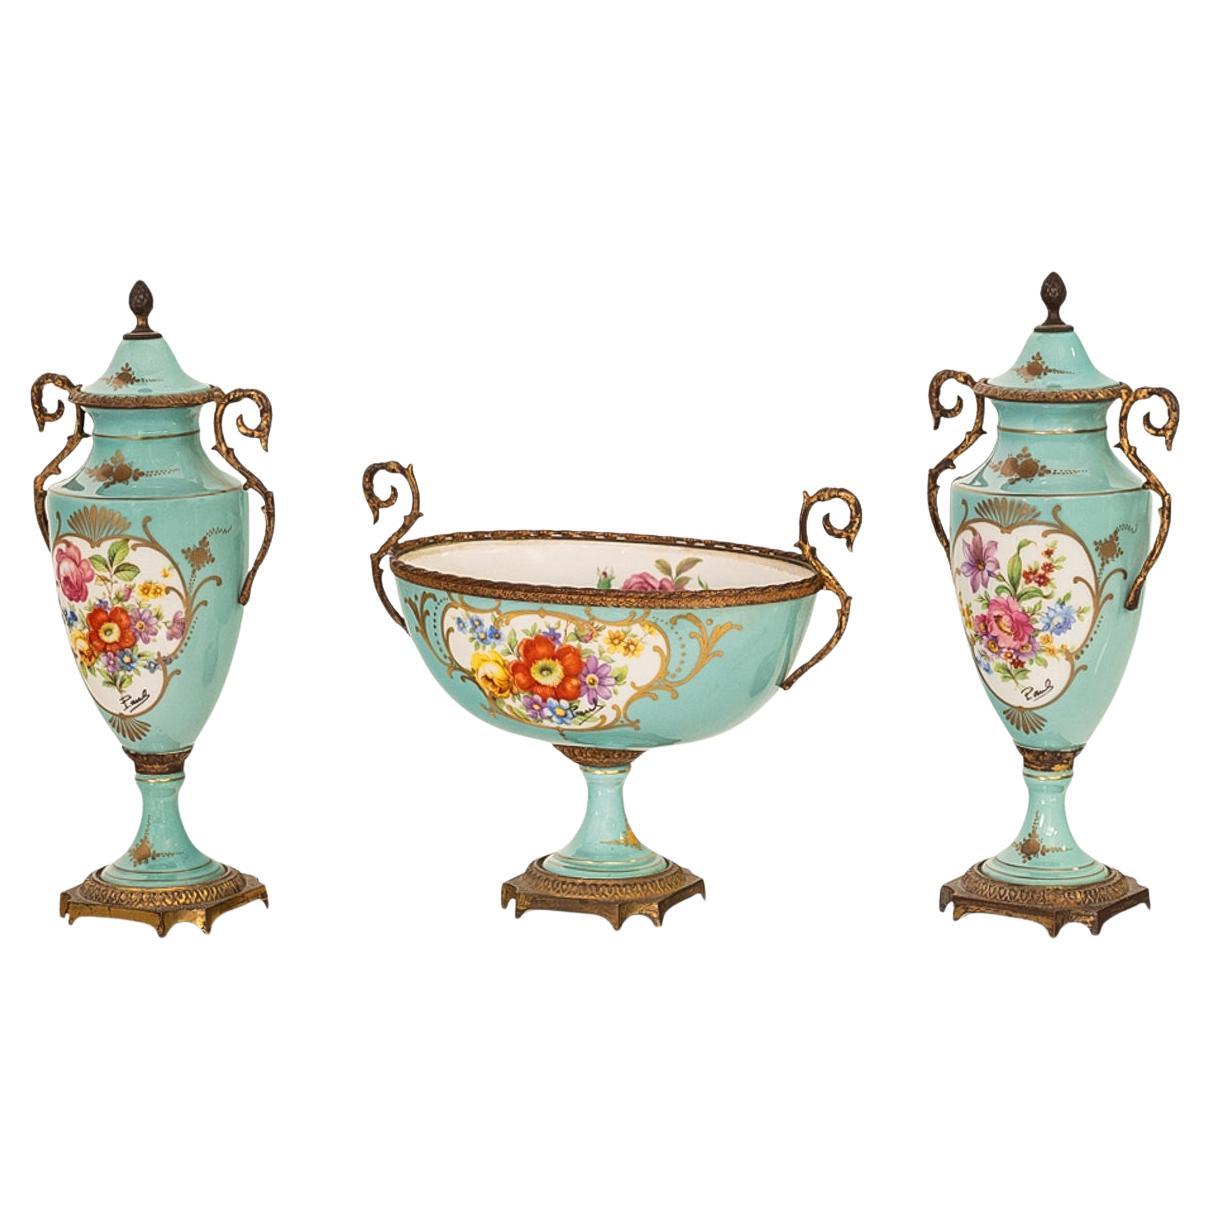 Antique, 3 piece French 'Sevres' style Porcelain de Paris & gilt-bronze garniture, signed, circa 1915.
The garniture comprising a pair of lidded, twin handled urns & a matching twin handled coupe or bowl. The lidded urns with bronze 'pineapple'